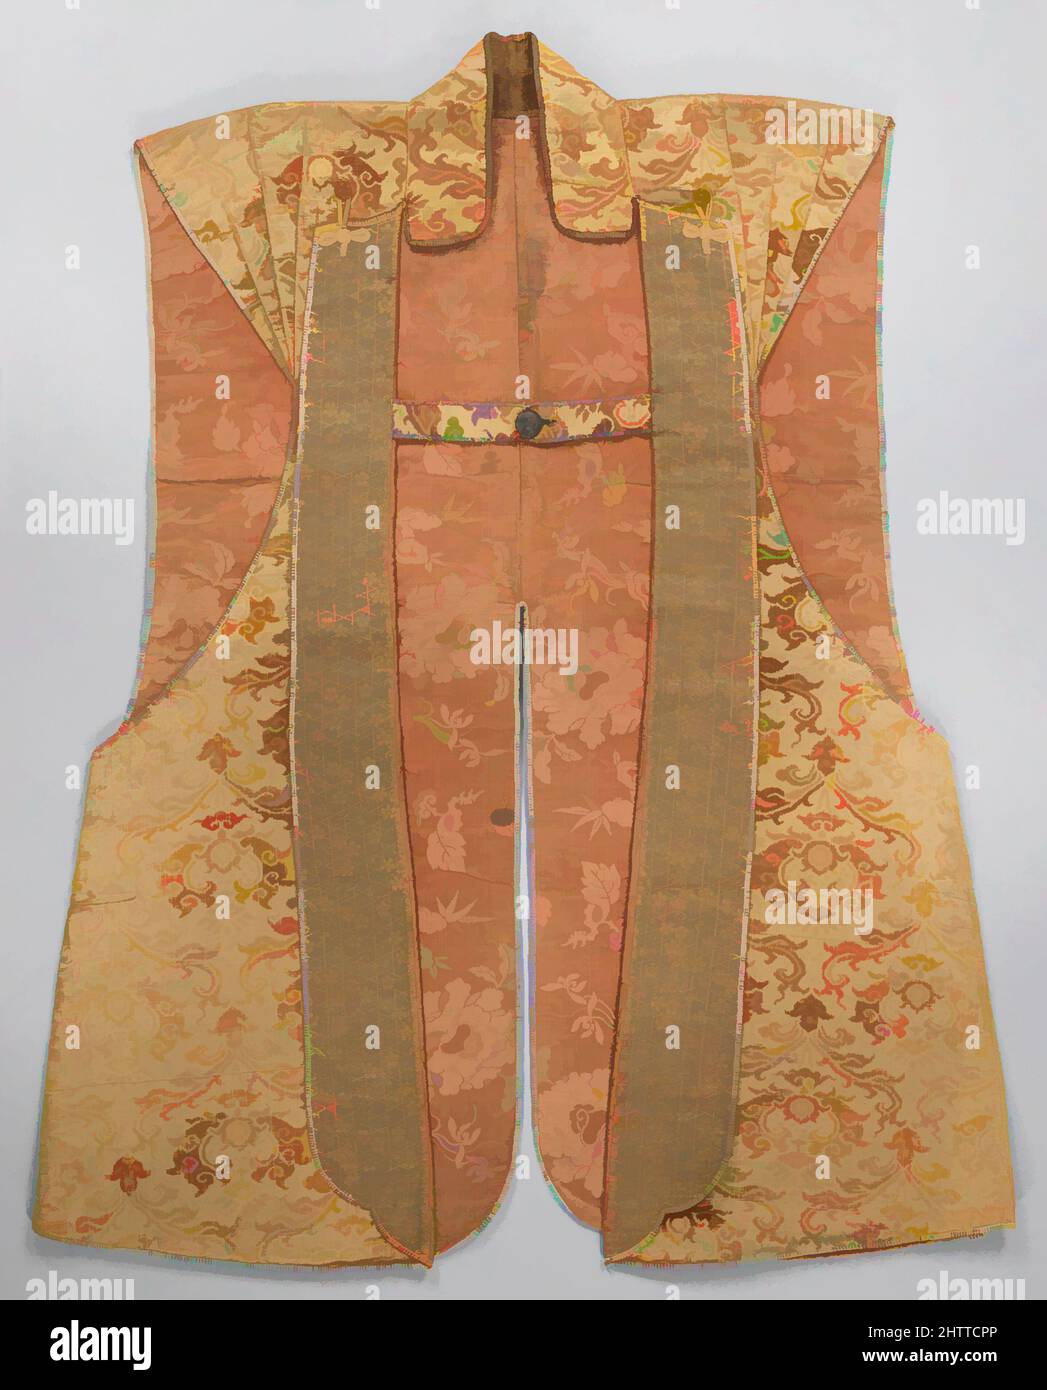 Art inspired by Surcoat (Jinbaori), Edo period (1615–1868), 17th century, Japan, Body: China, for the European market, late 16th–17th century; silk velvet, cut and voided, 36 5/8 x 27 1/8 in. (93.0 x 68.9 cm), Costumes, Samurai jinbaori were frequently made from expensive and, Classic works modernized by Artotop with a splash of modernity. Shapes, color and value, eye-catching visual impact on art. Emotions through freedom of artworks in a contemporary way. A timeless message pursuing a wildly creative new direction. Artists turning to the digital medium and creating the Artotop NFT Stock Photo